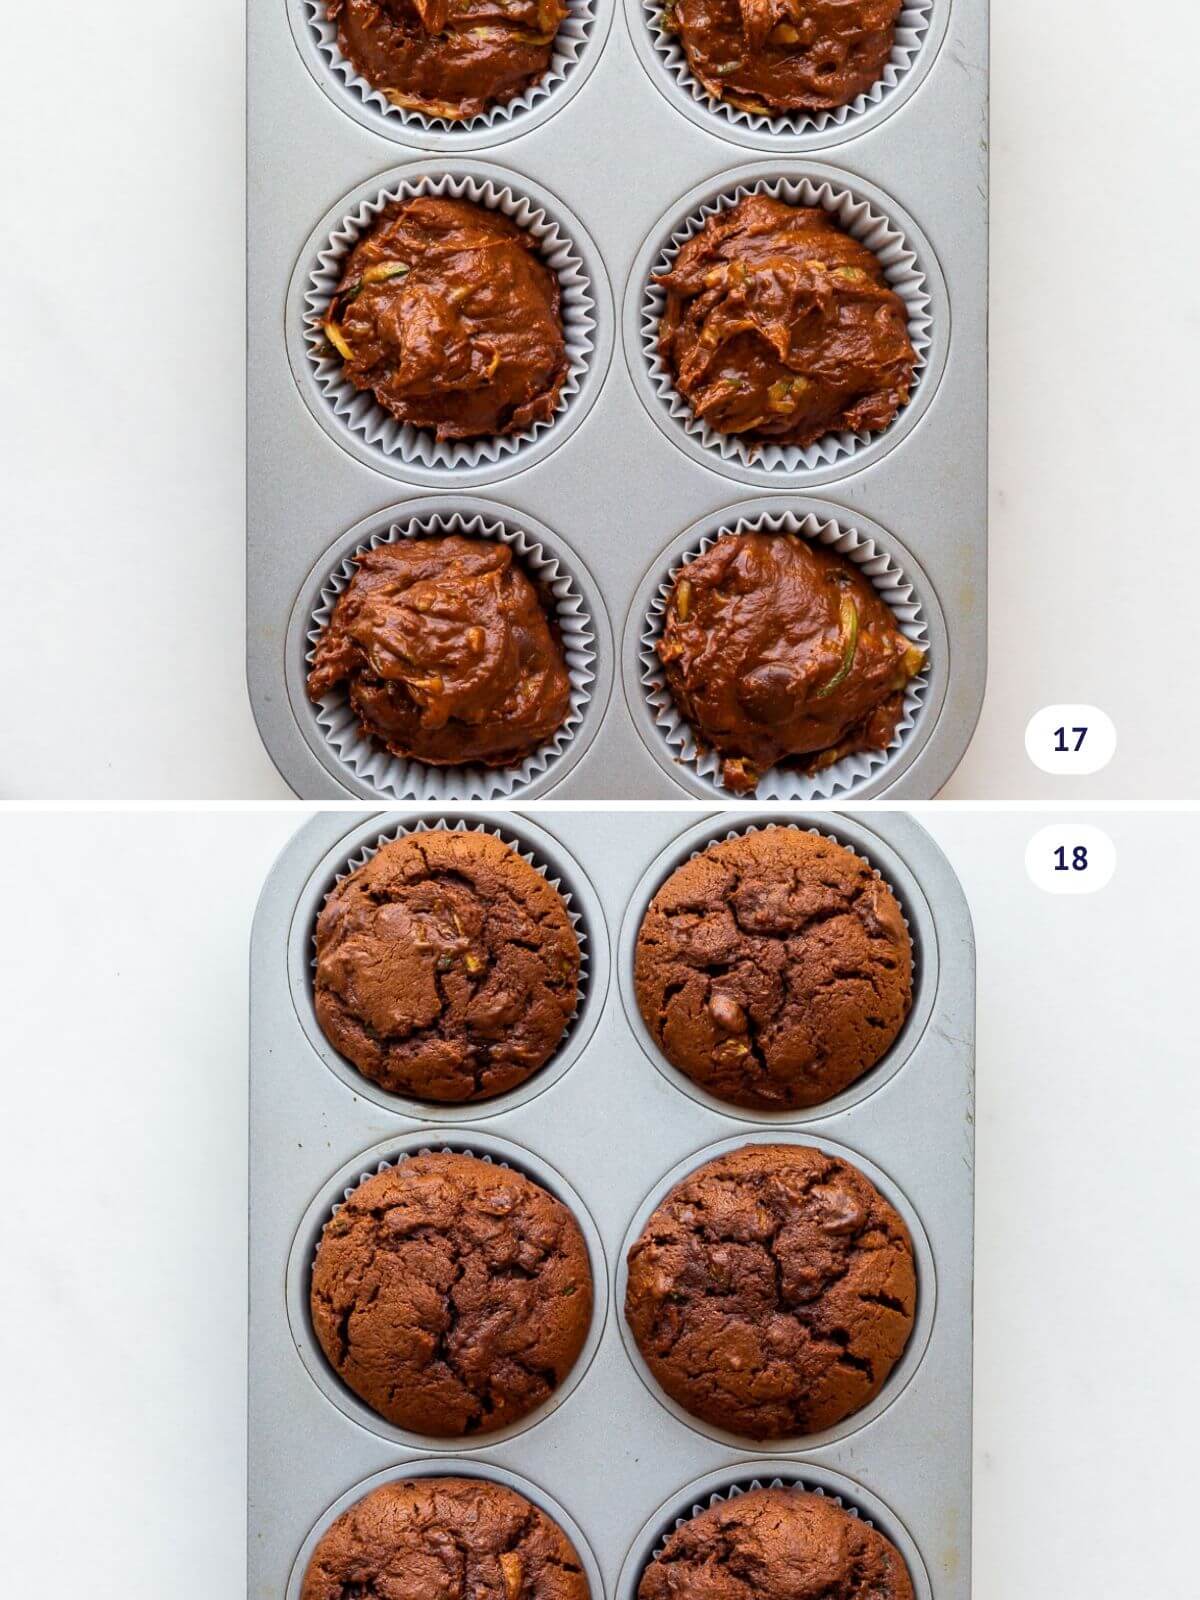 Collage to show double chocolate zucchini muffins before and after baking in a muffin pan.